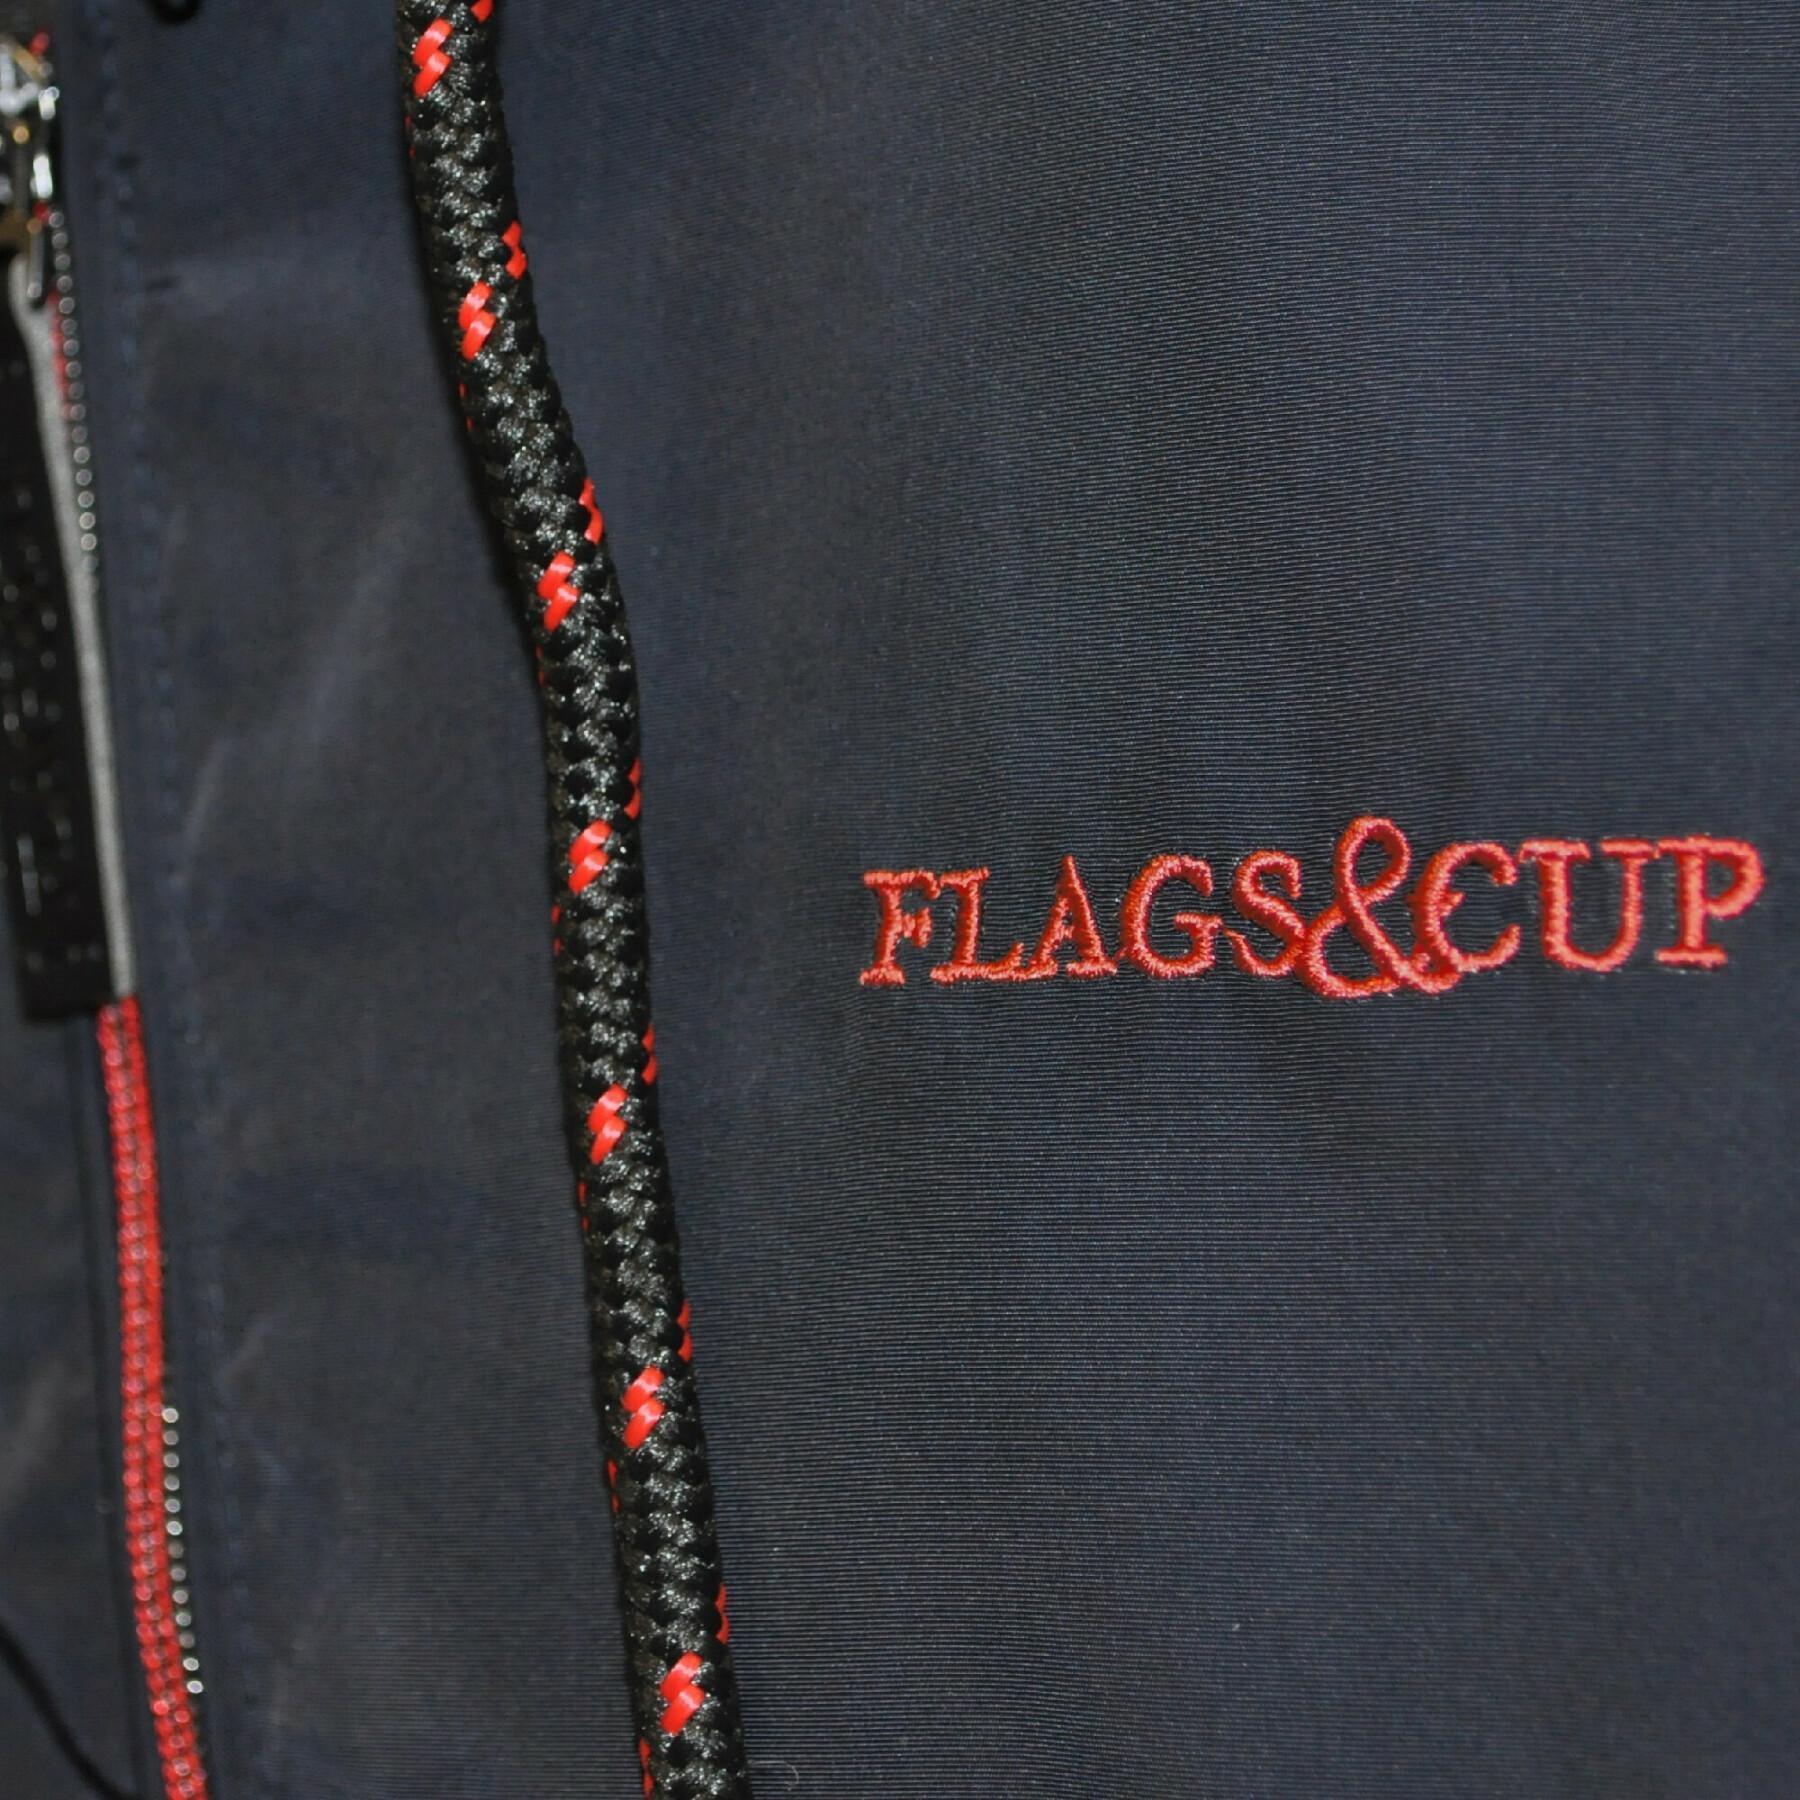 Jas Flags&Cup Ambo